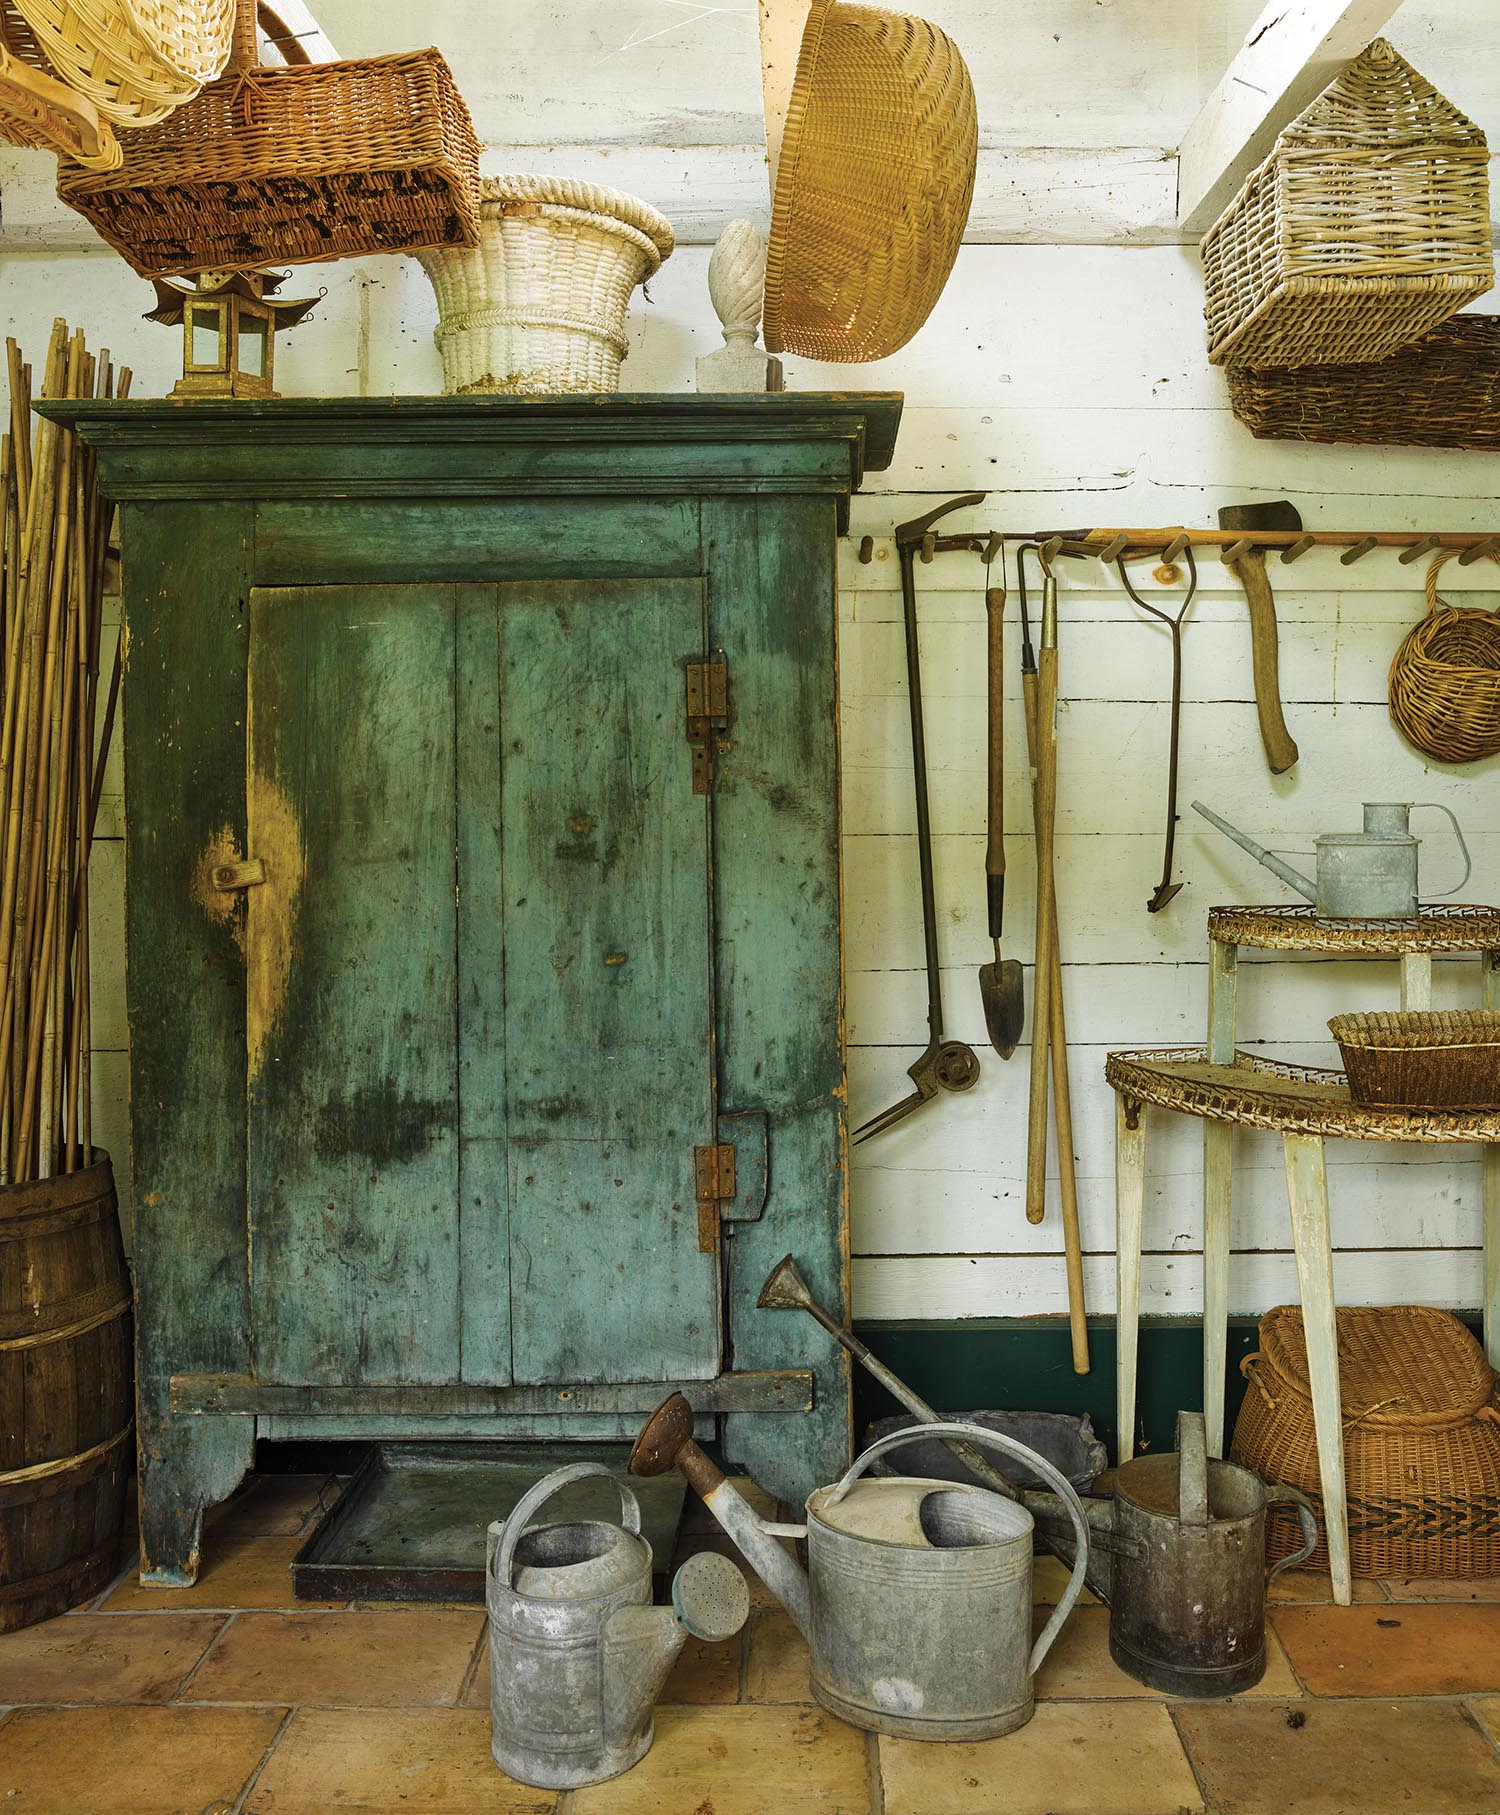 A blue cabinet sits among watering cans.